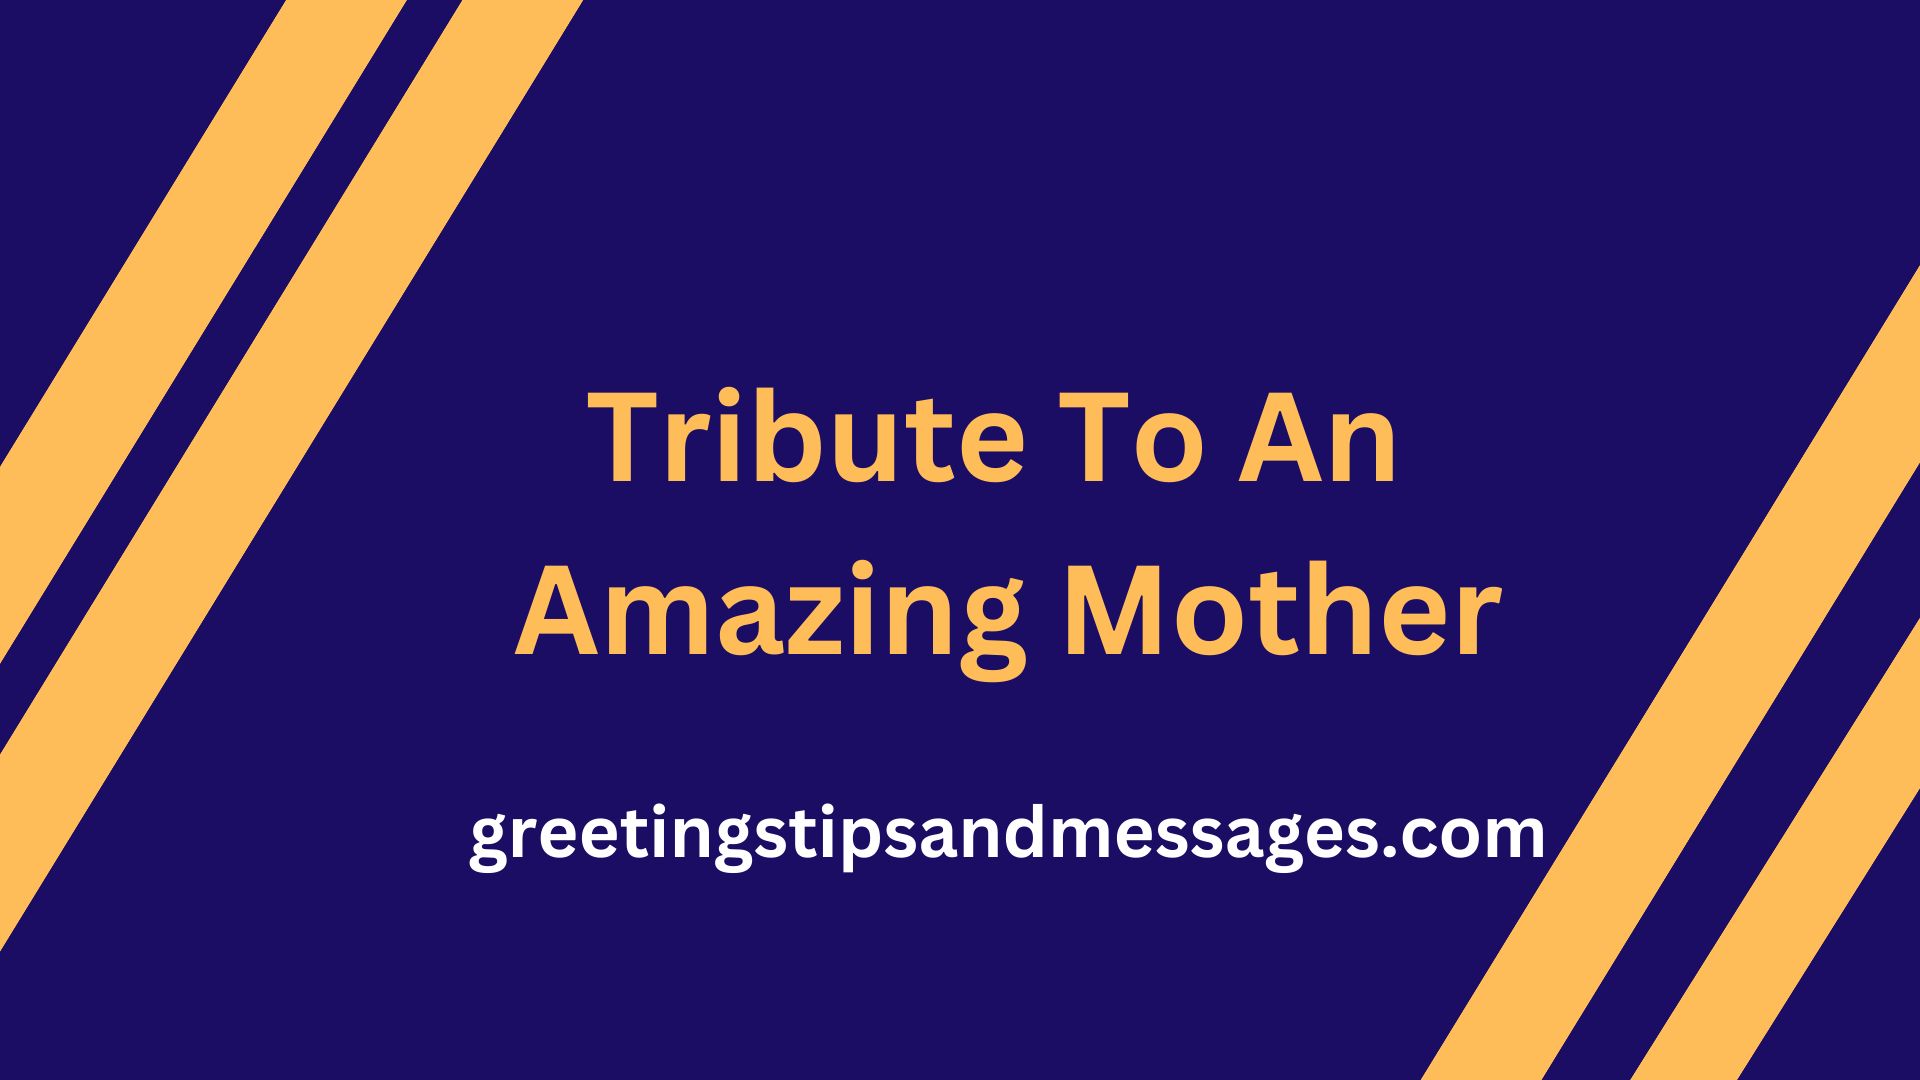 Tribute To An Amazing Mother